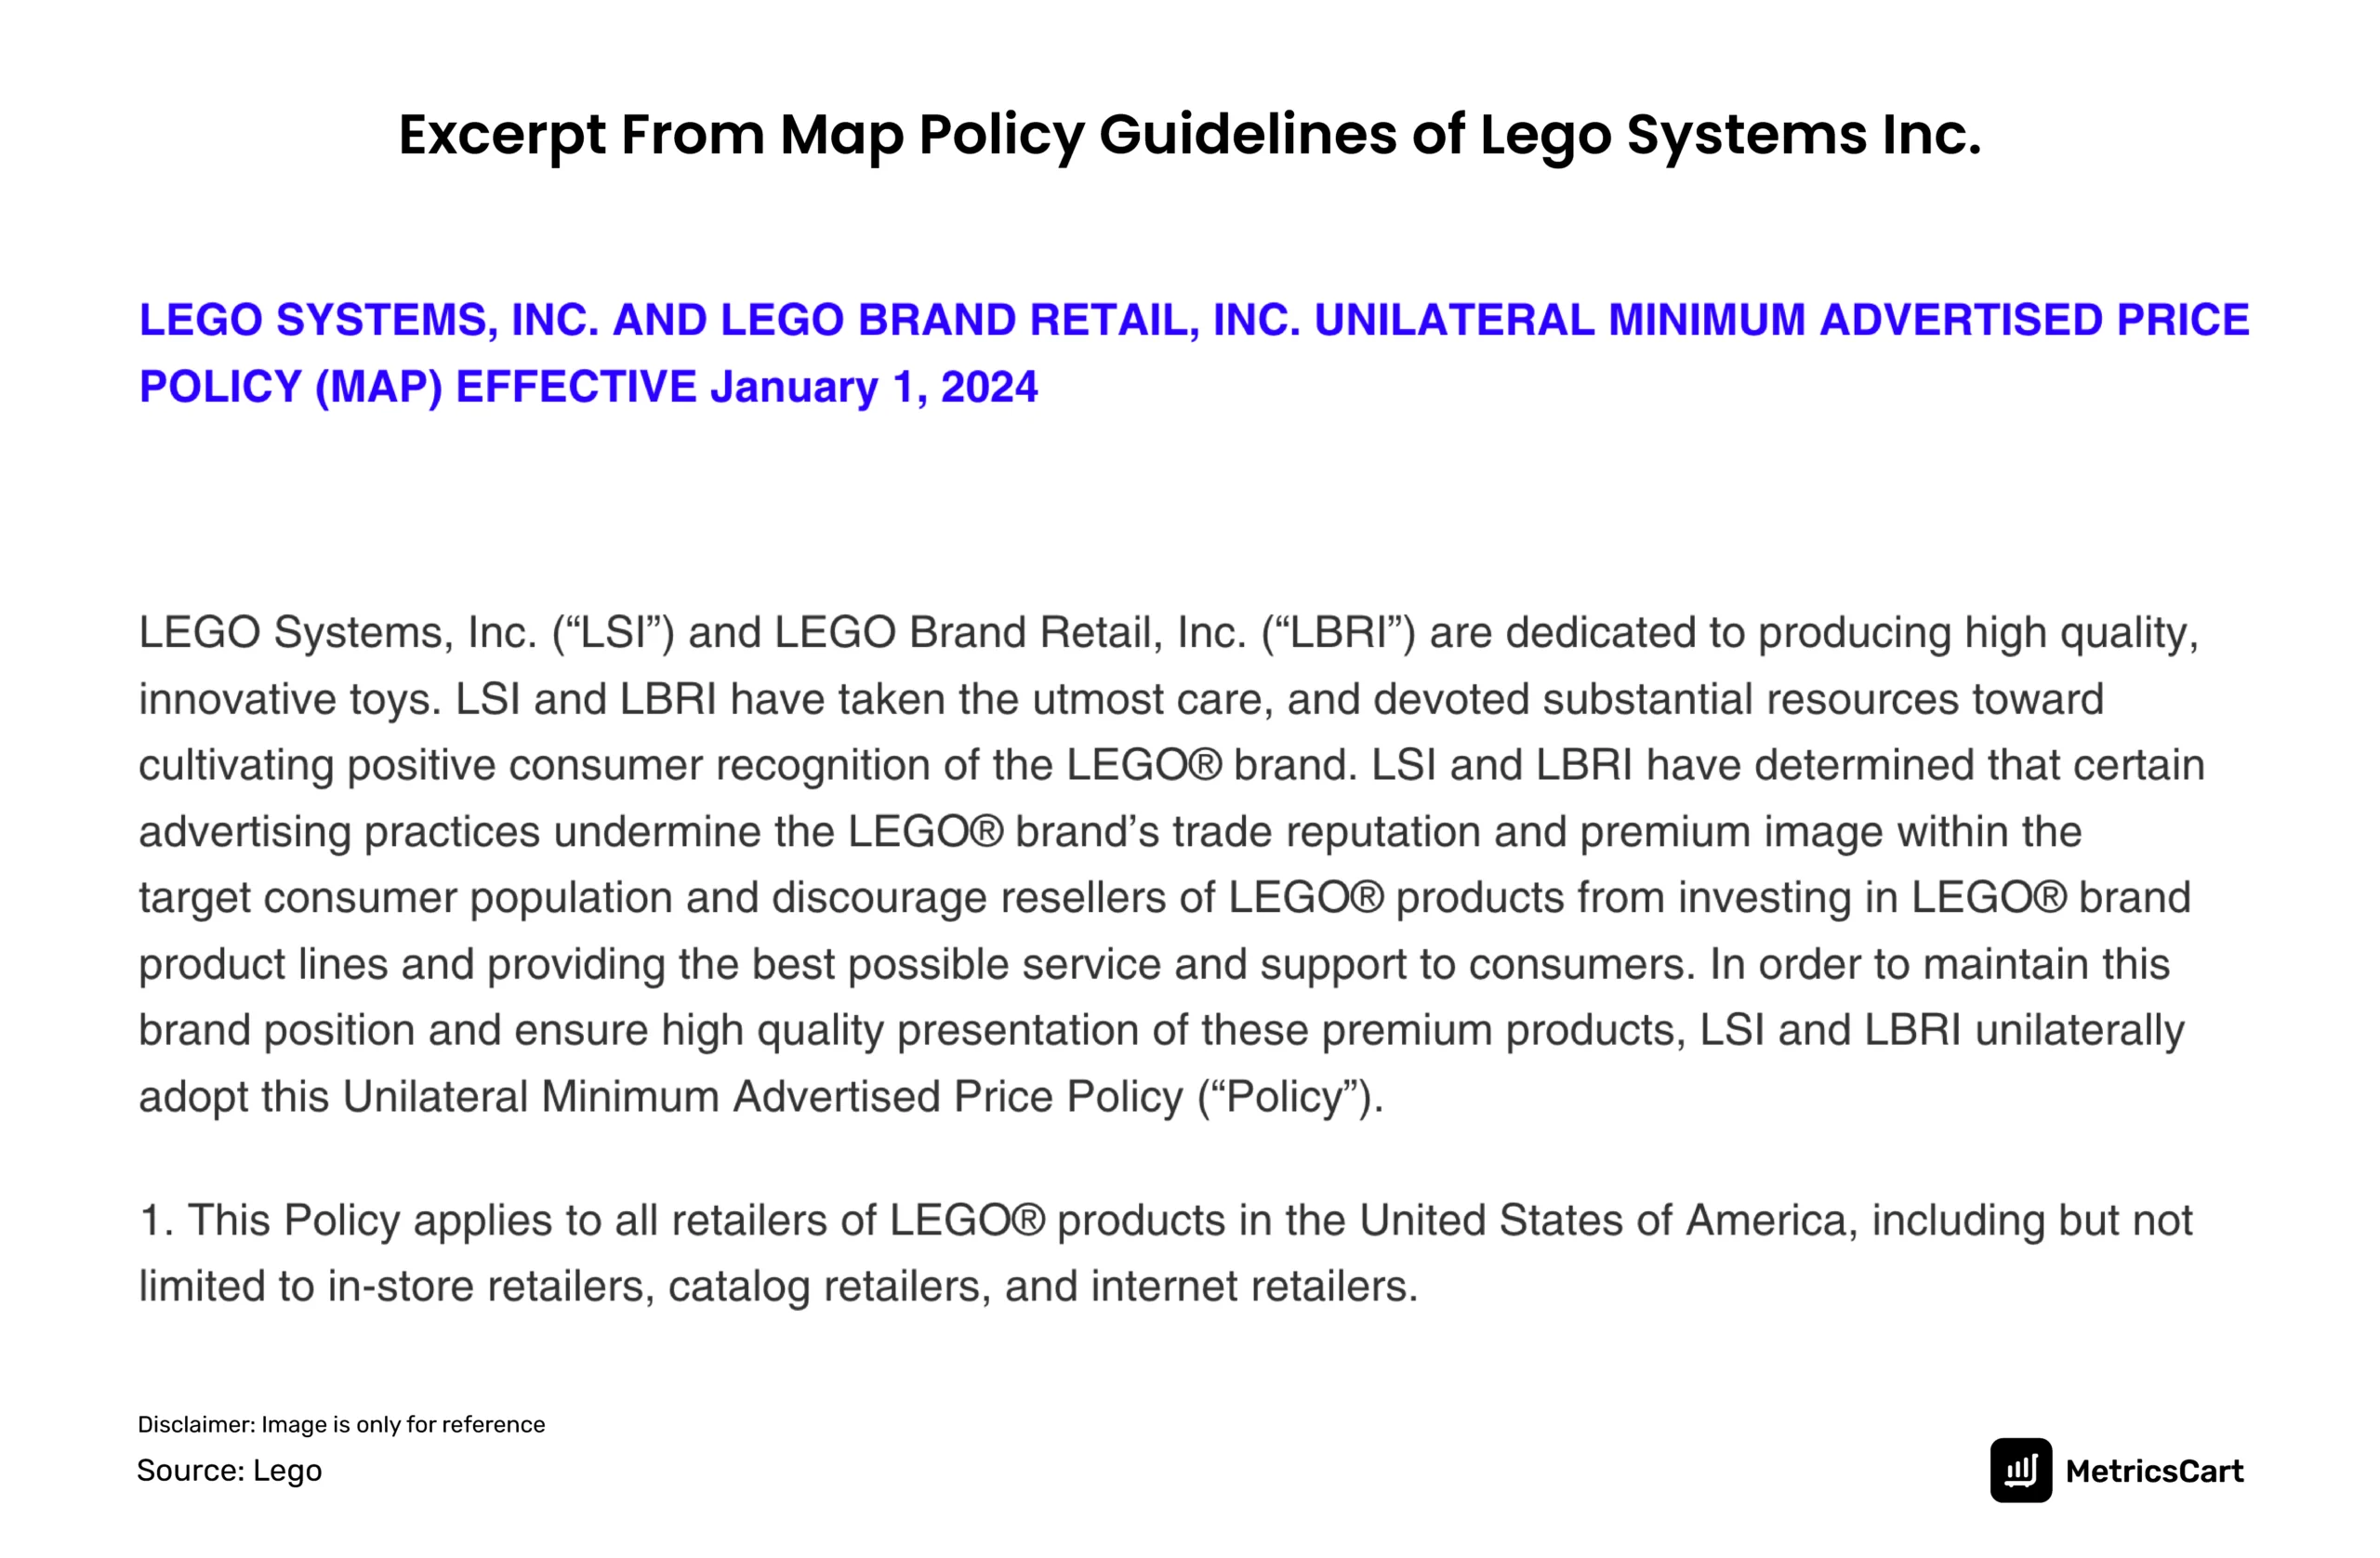 A screenshot of the MAP policy guidelines of LEGO Systems Inc. 